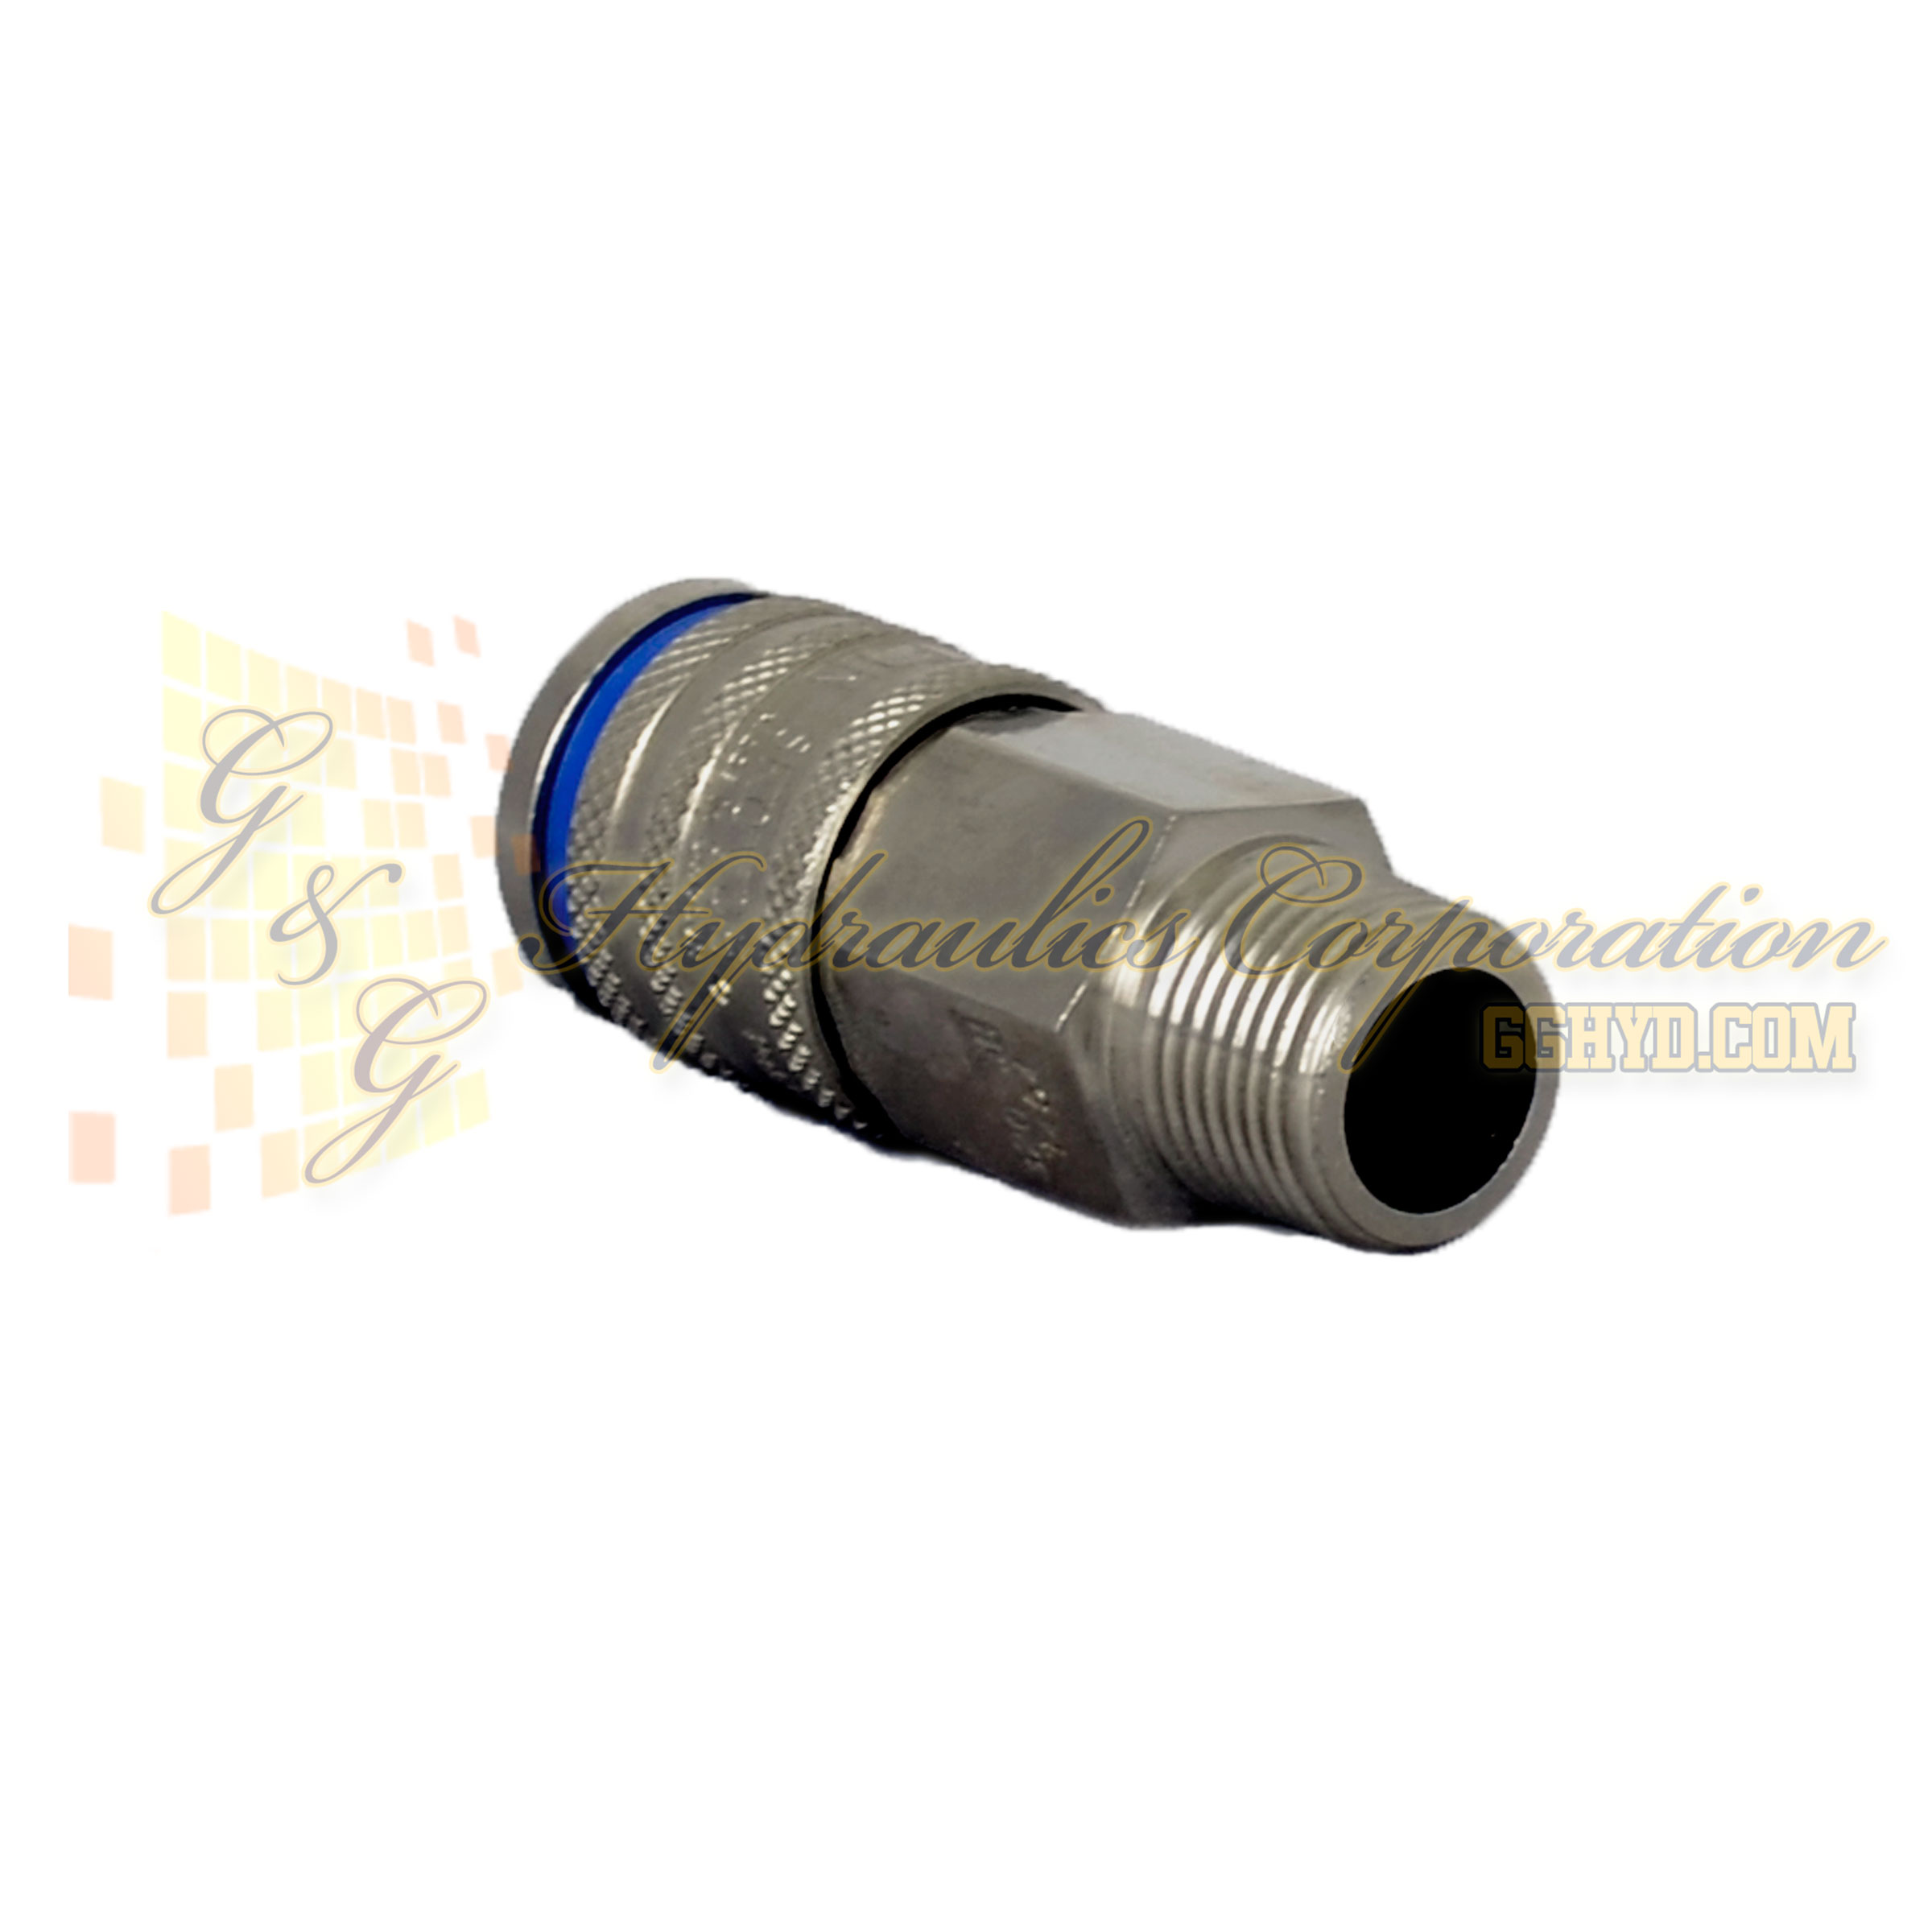 10-320-5454 CEJN Standard and Vented Safety Coupler, 3/8" NPT Male Threads